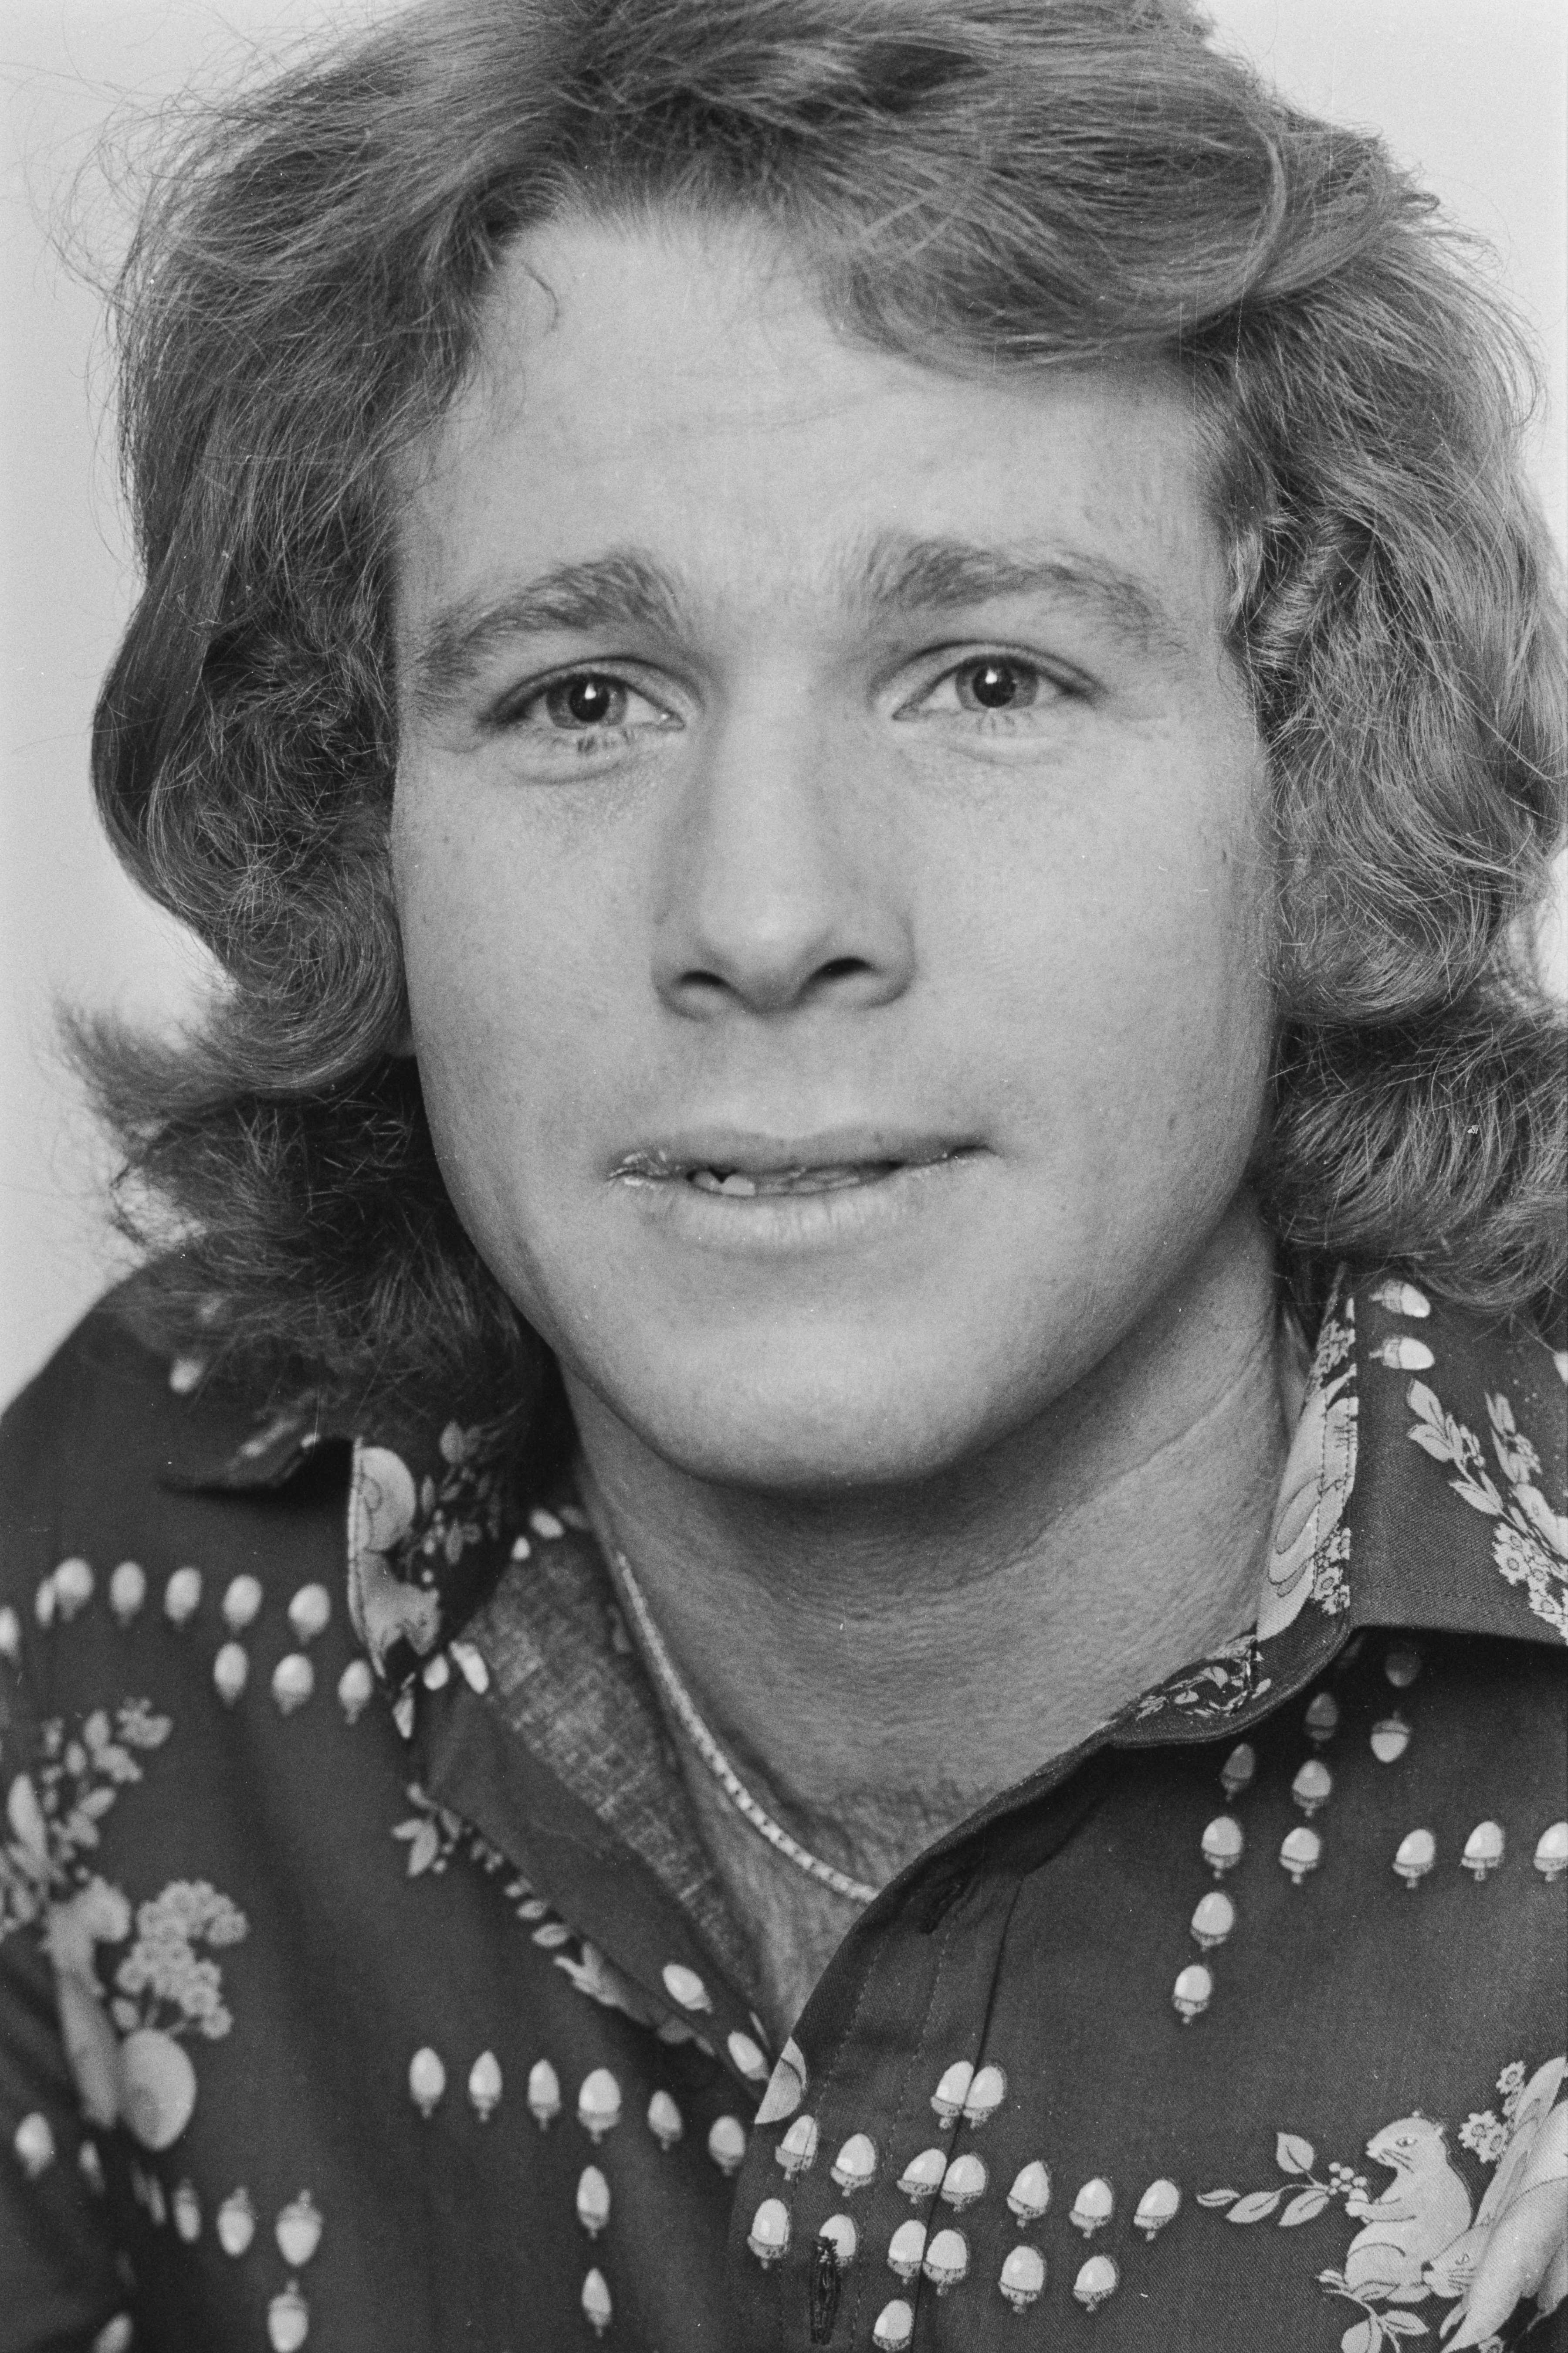 Ryan O'Neal on December 3, 1973 | Source: Getty Images